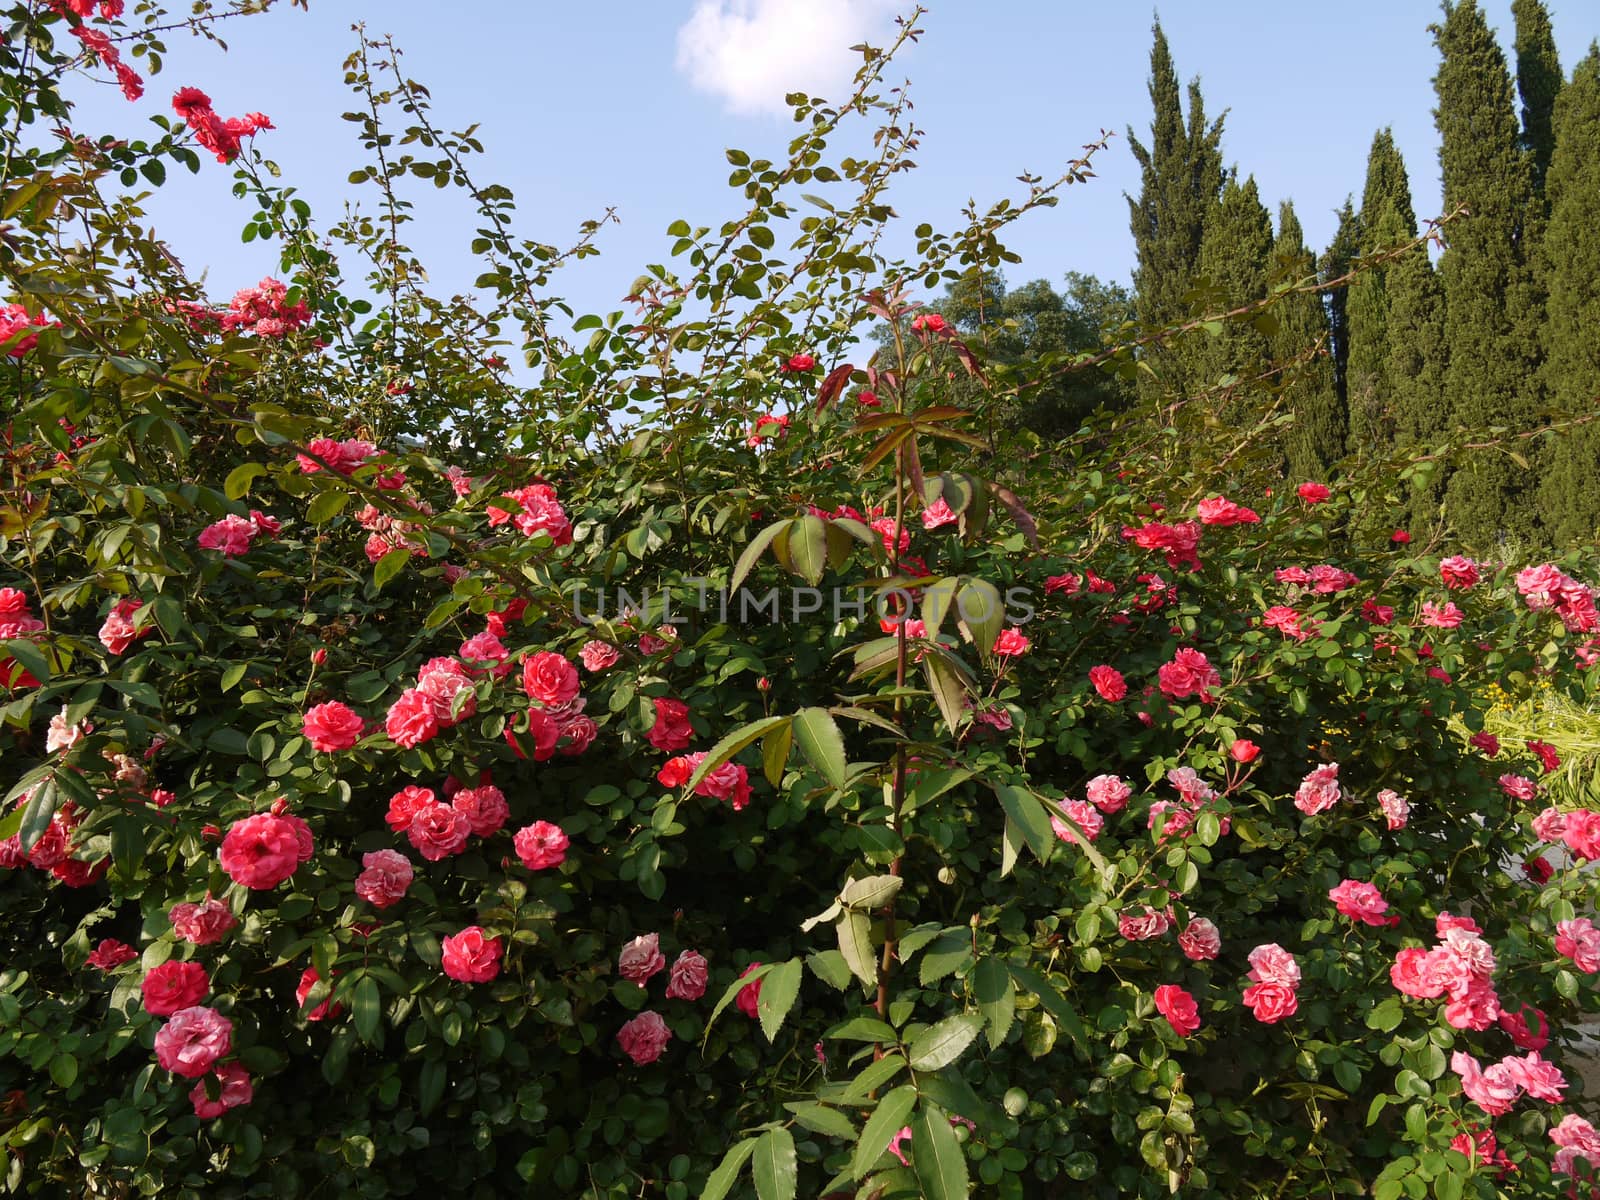 Thick, woven rose bushes with mane stalks and prickly needles by Adamchuk